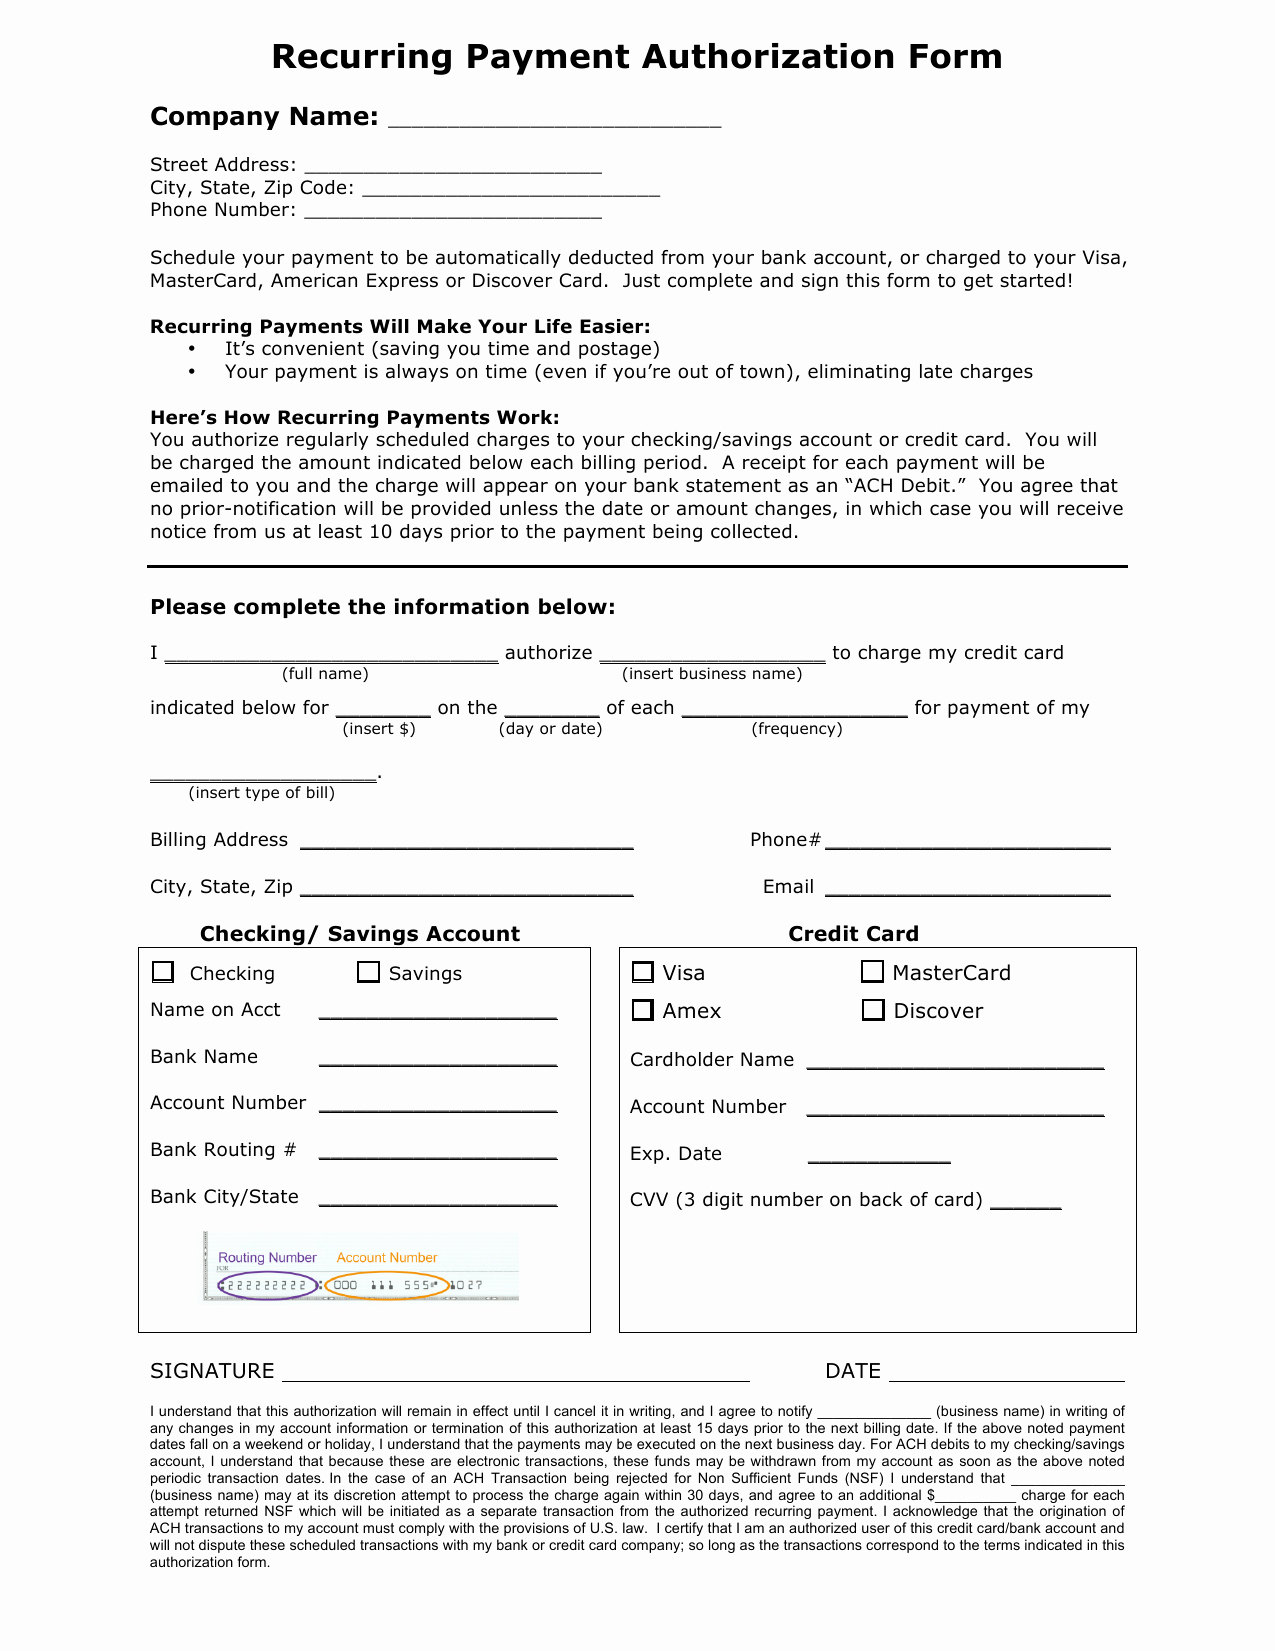 Payment Authorization form Template Awesome Download Recurring Payment Authorization form Template